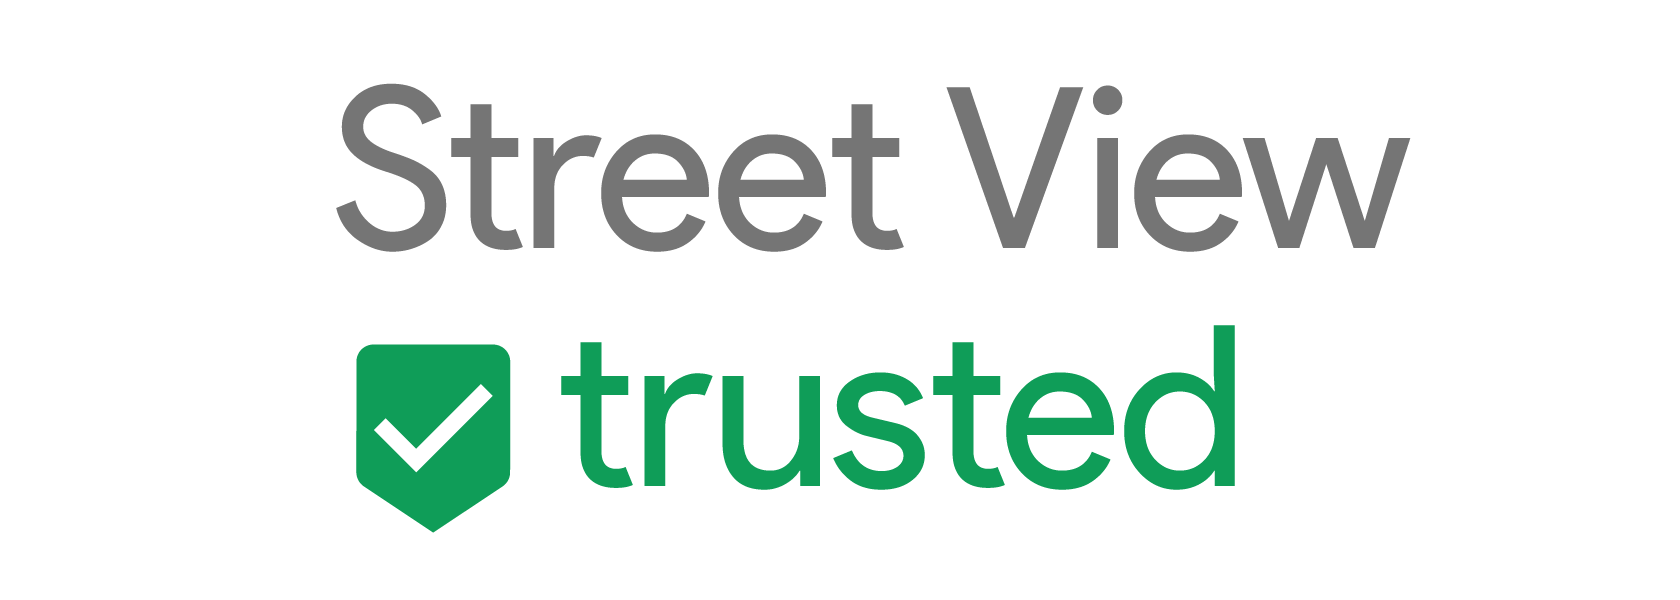 Street View Trusted